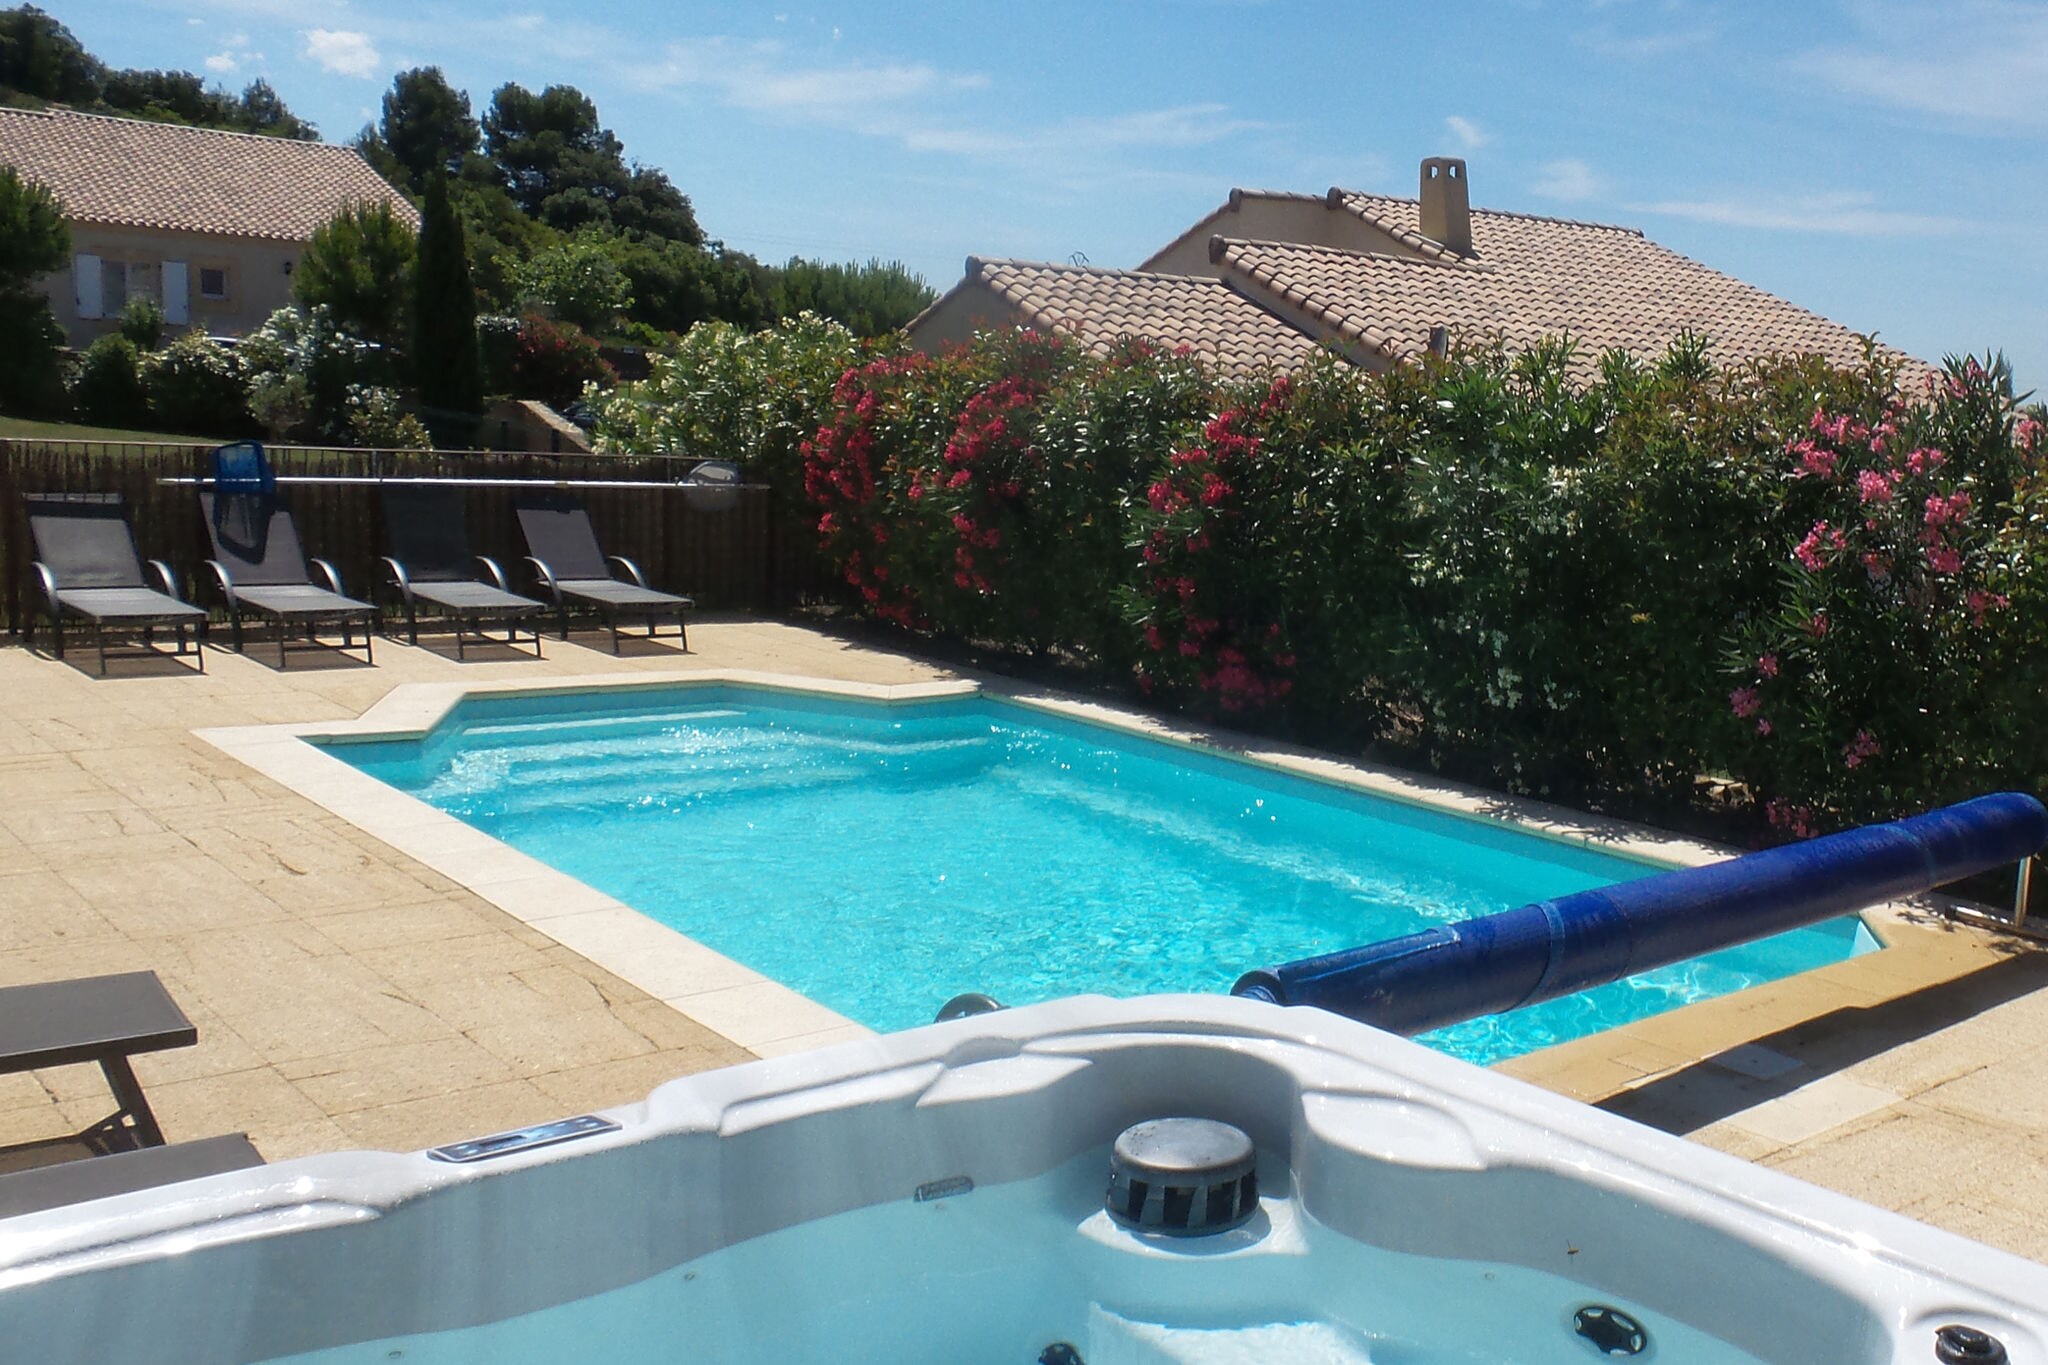 Villa with air-con, heated pool, bubble bath, fenced garden and kids play equipment